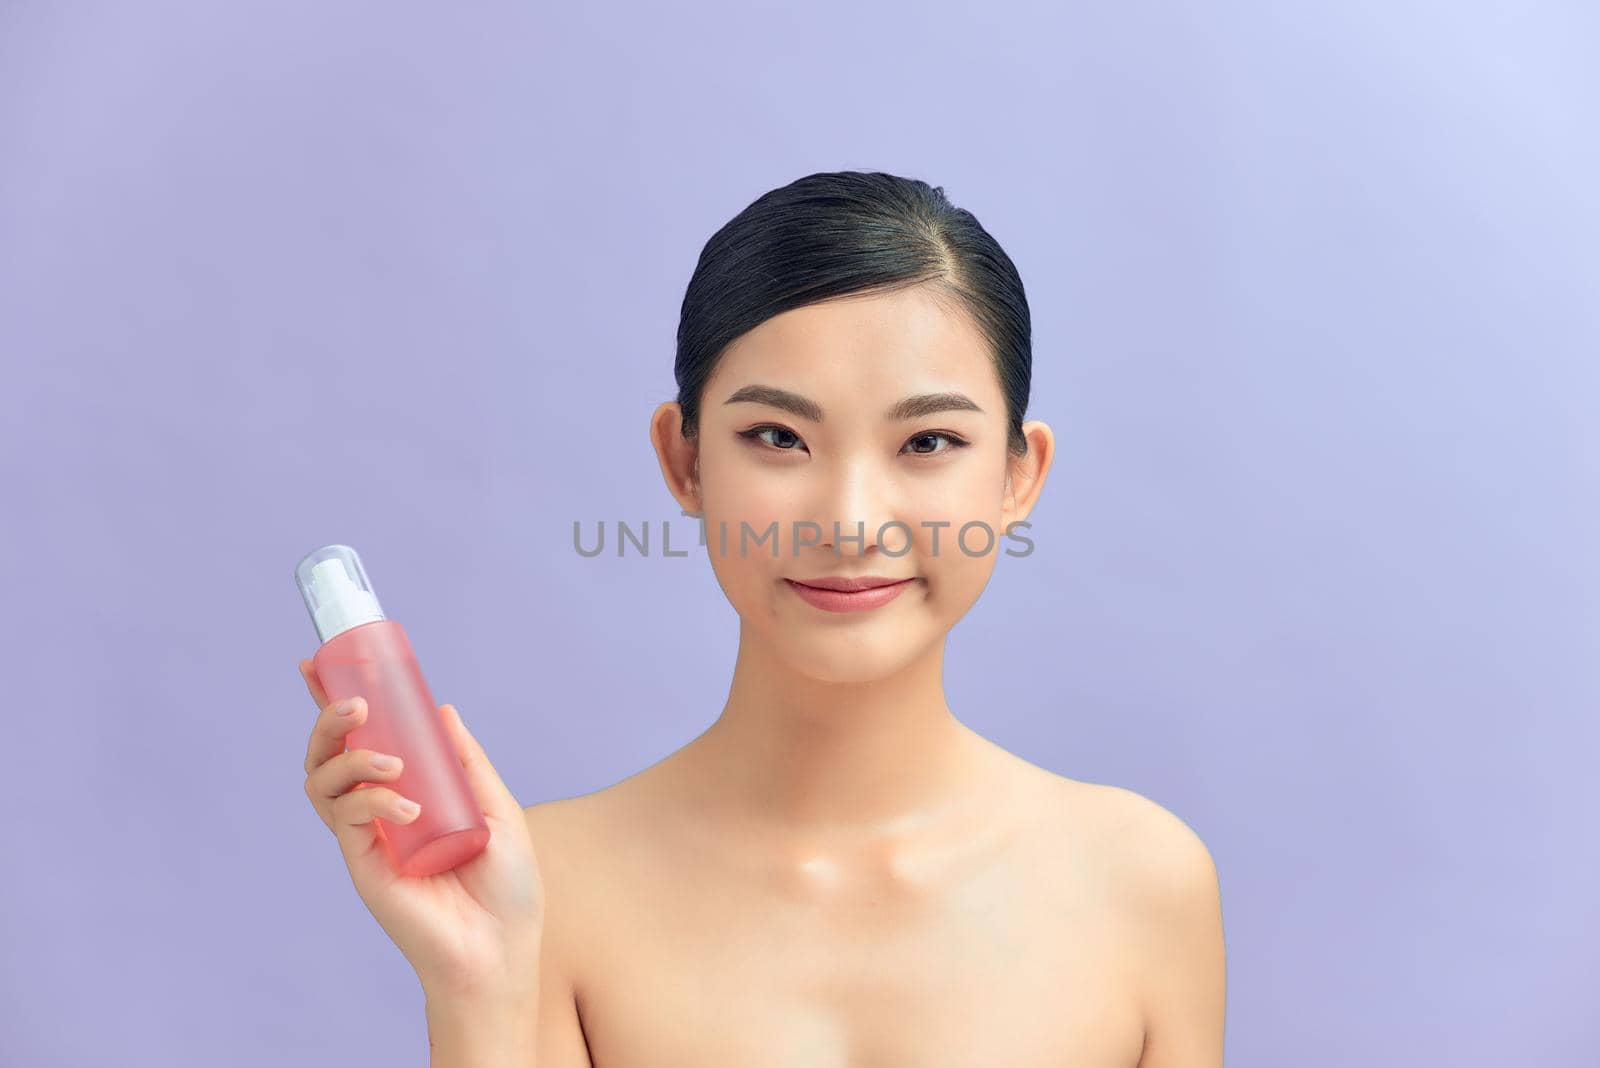 Portrait of a beautiful young girl standing isolated over color background, showing body lotion bottle